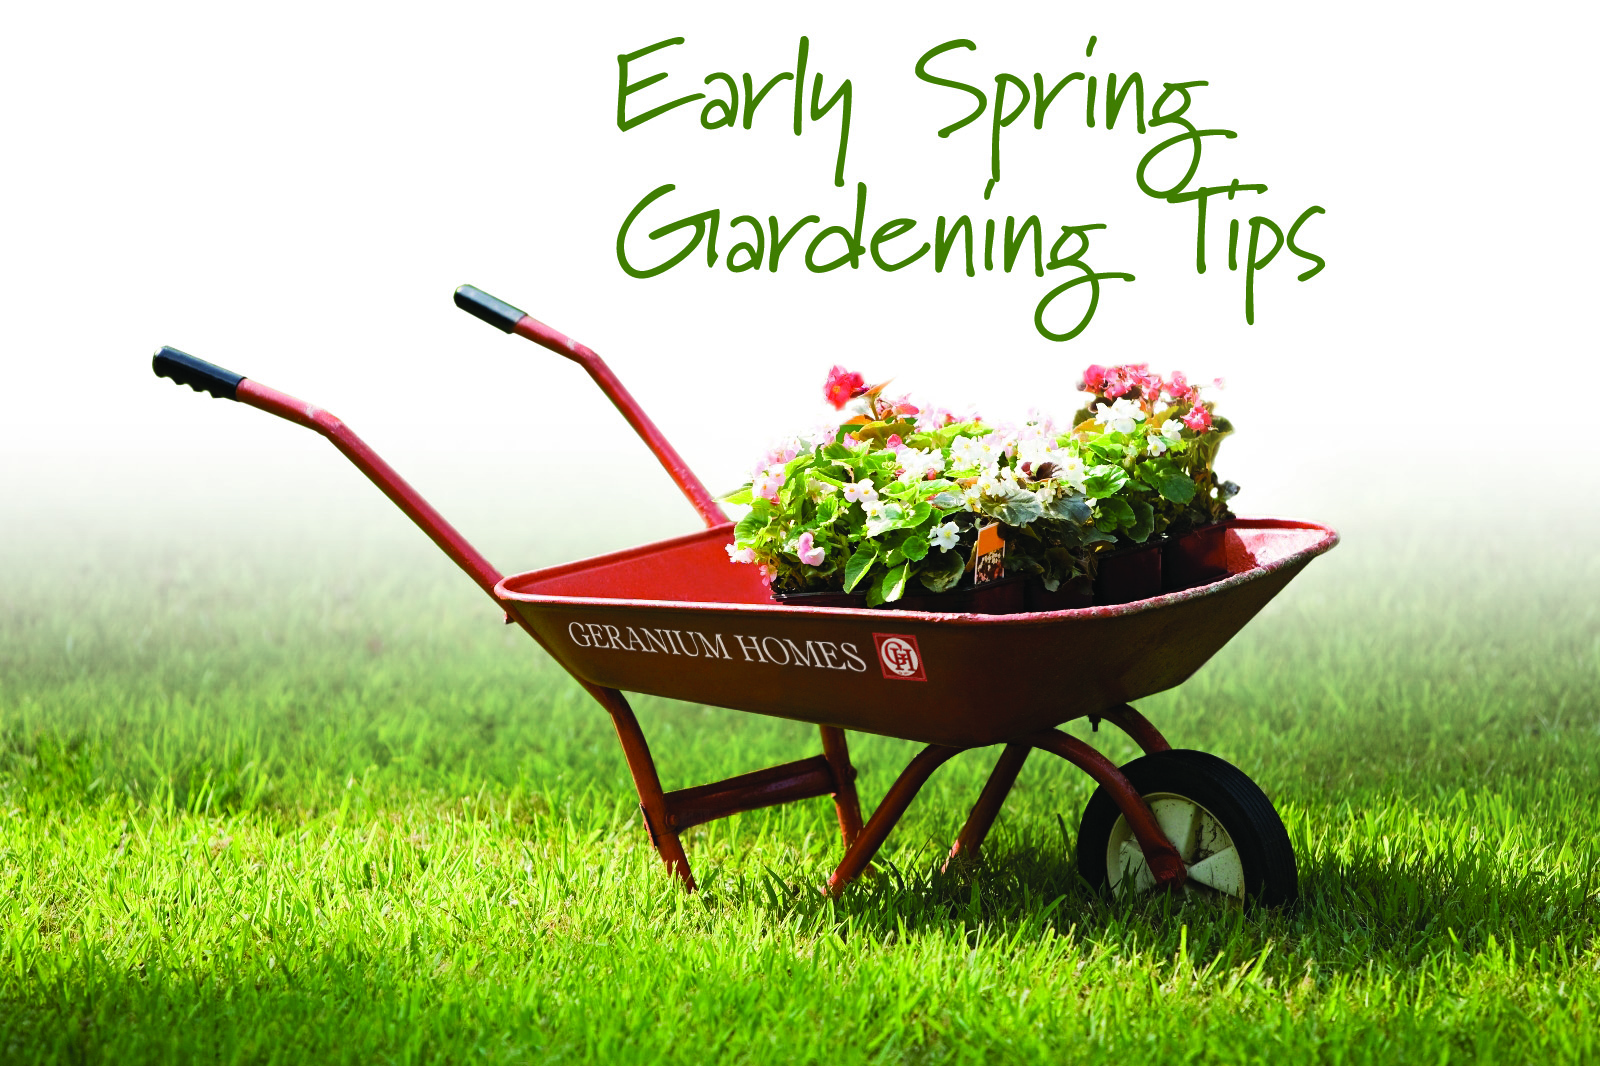 Practical Tips for Successful Early Gardening